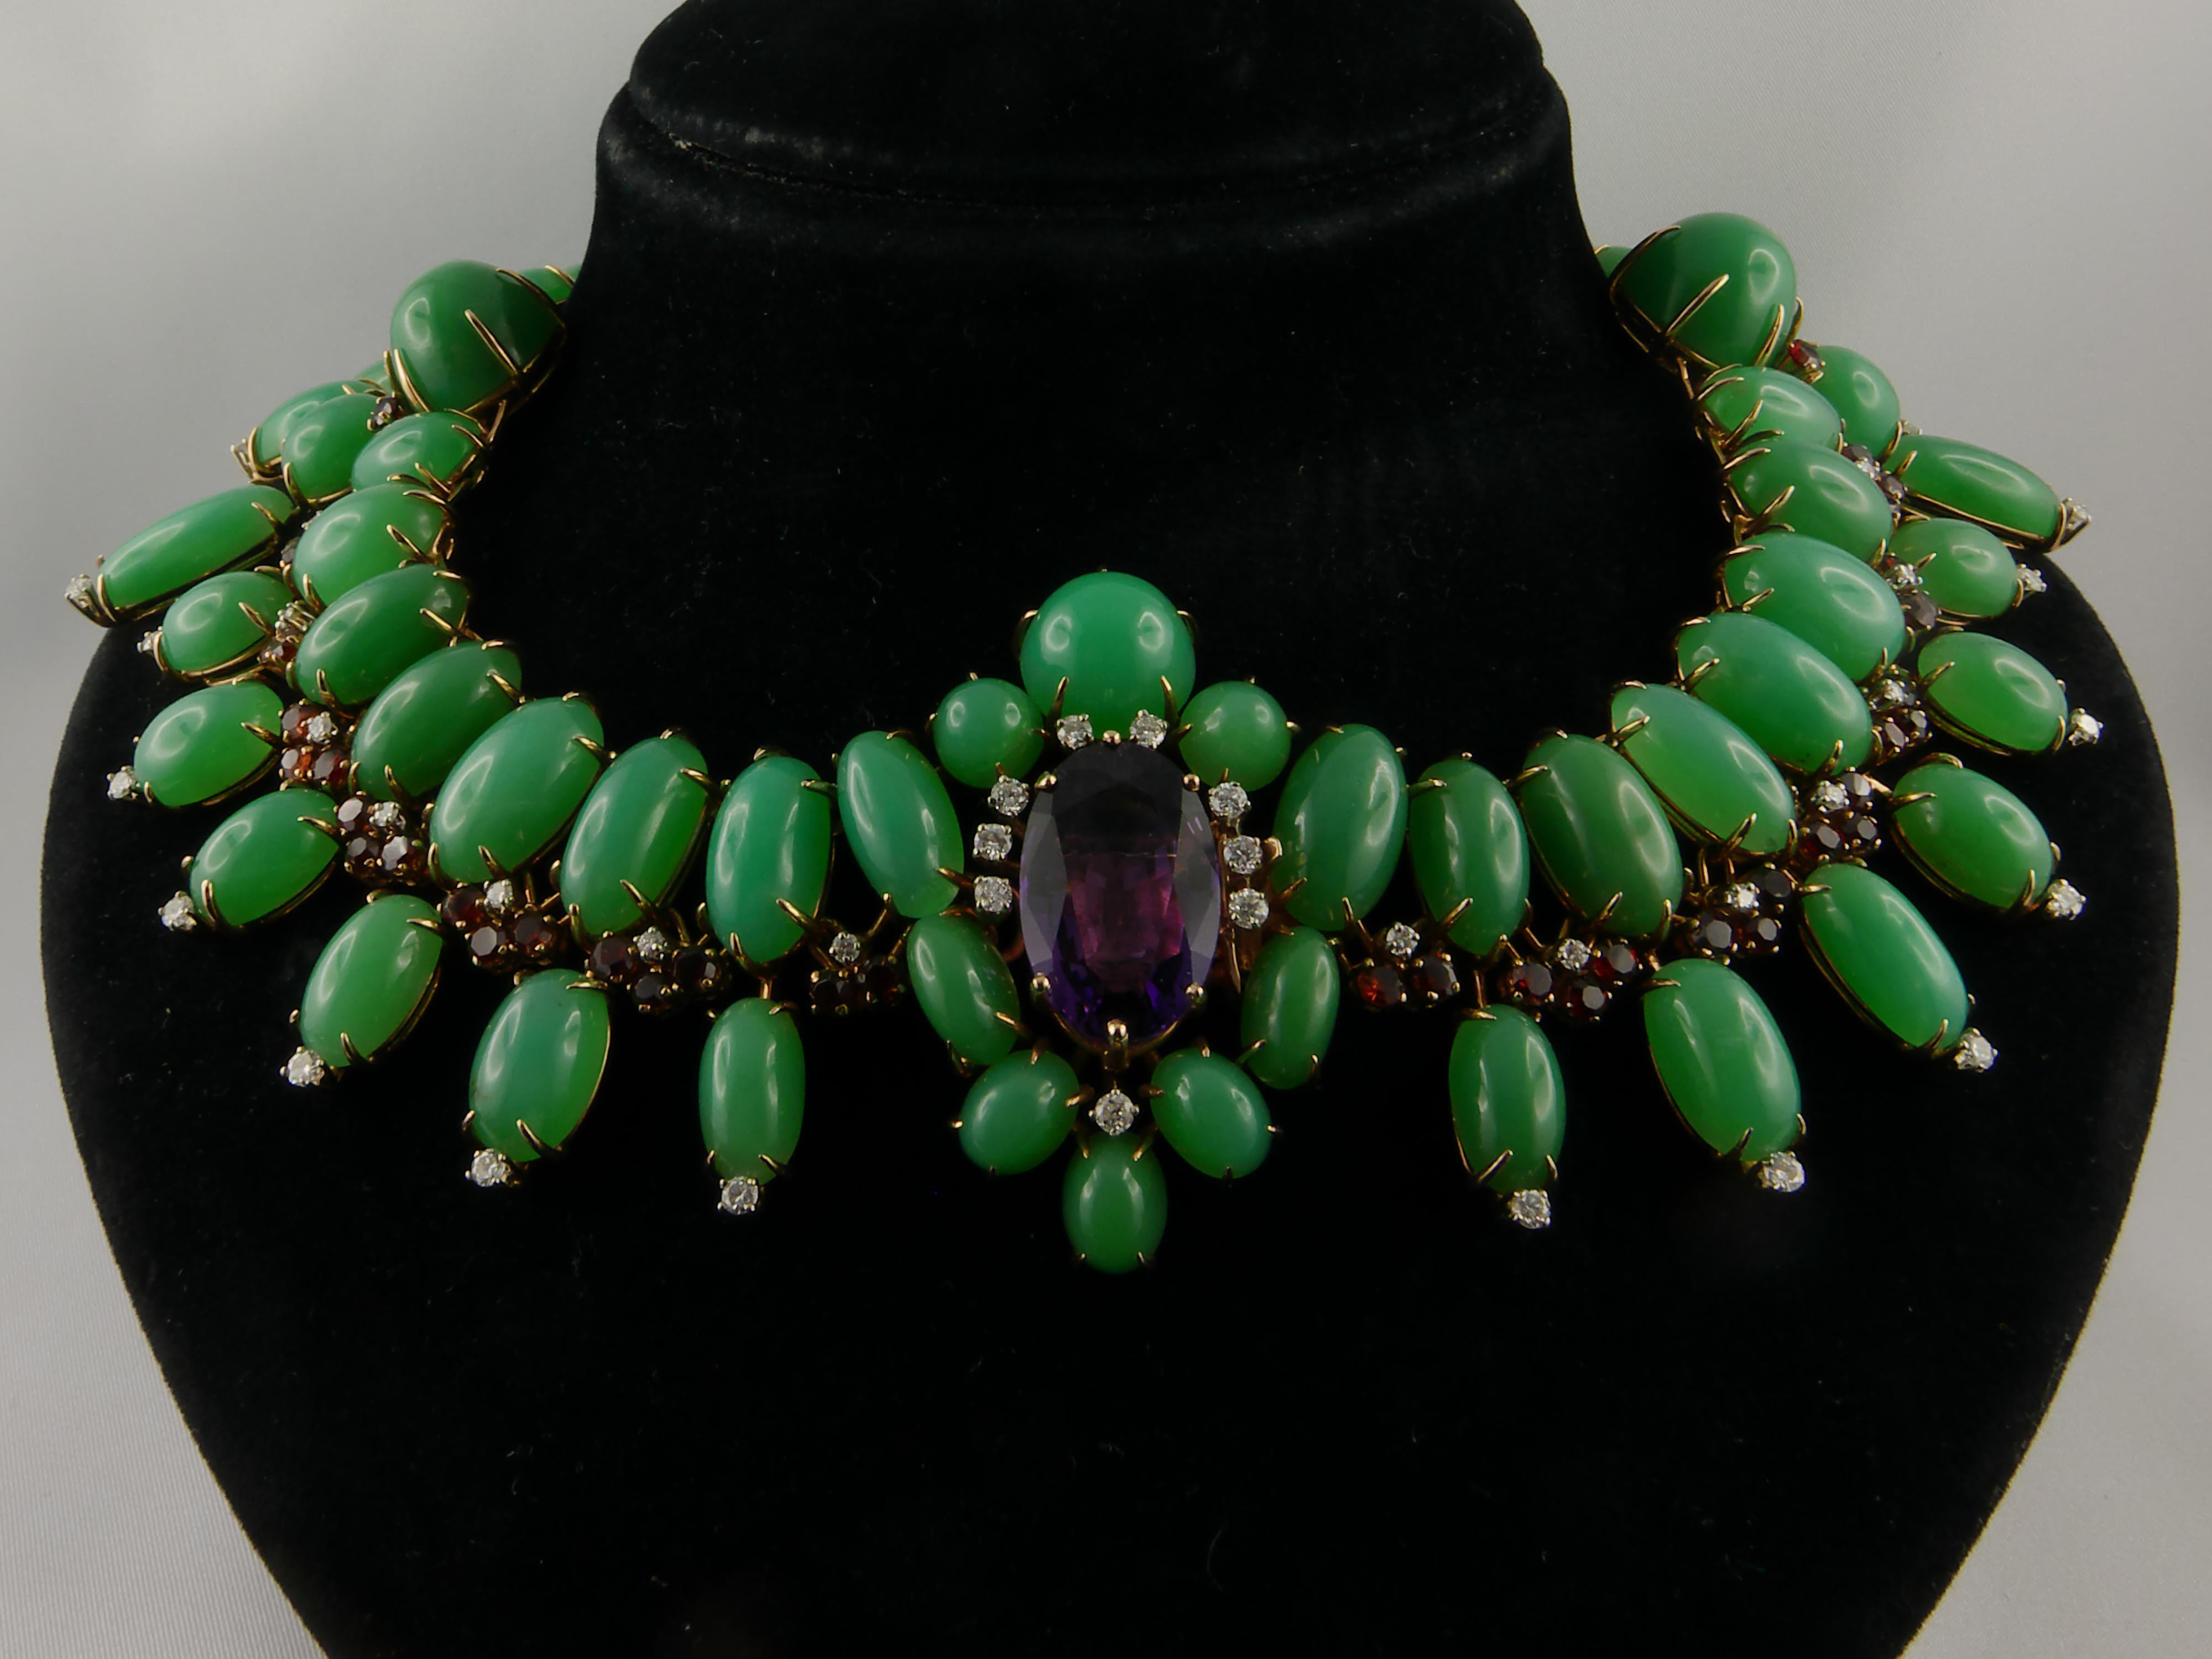 Impressive 1950s Austrian  Necklace with Amethyst Diamonds and Citrines, set in Rose Gold 
The Chrysoprase oval-shaped cabochons form a gorgeous double row fringe alterned with a glittering array of Citrines.
The central motif, adorned with a rich